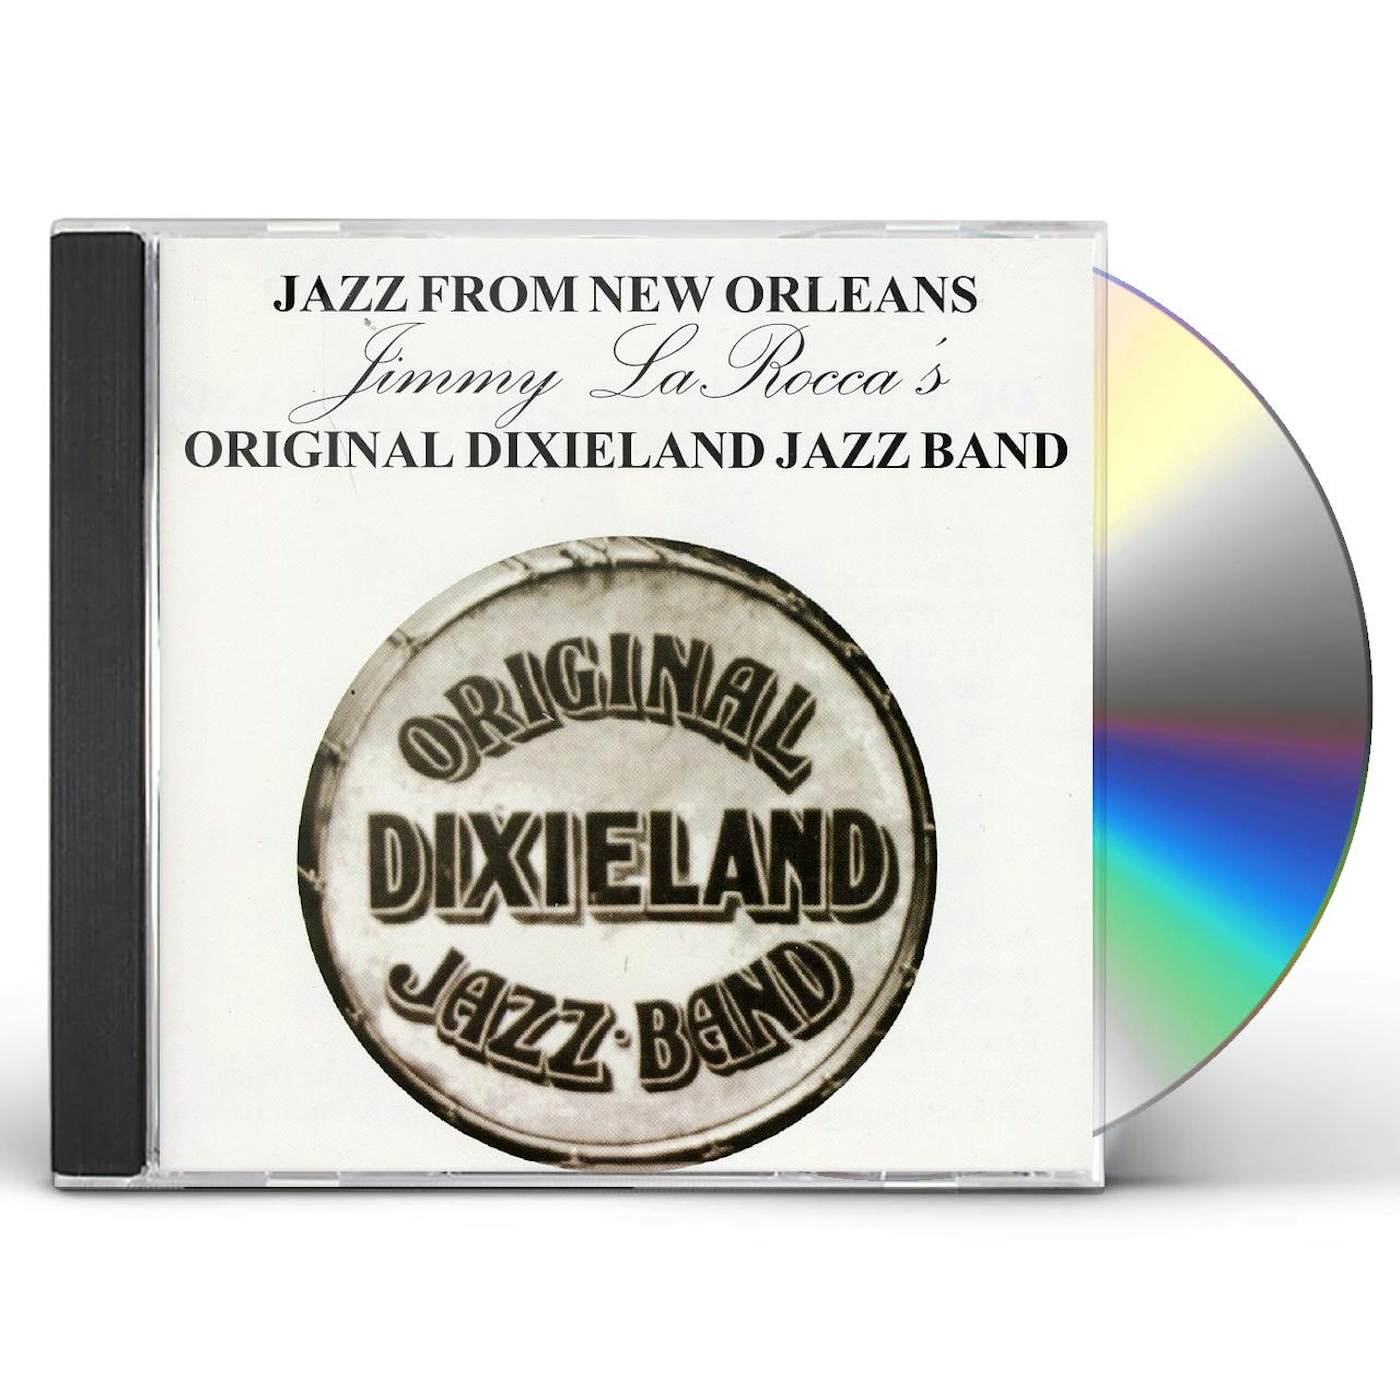 Original Dixieland Jazz Band JAZZ FROM NEW ORLEANS CD